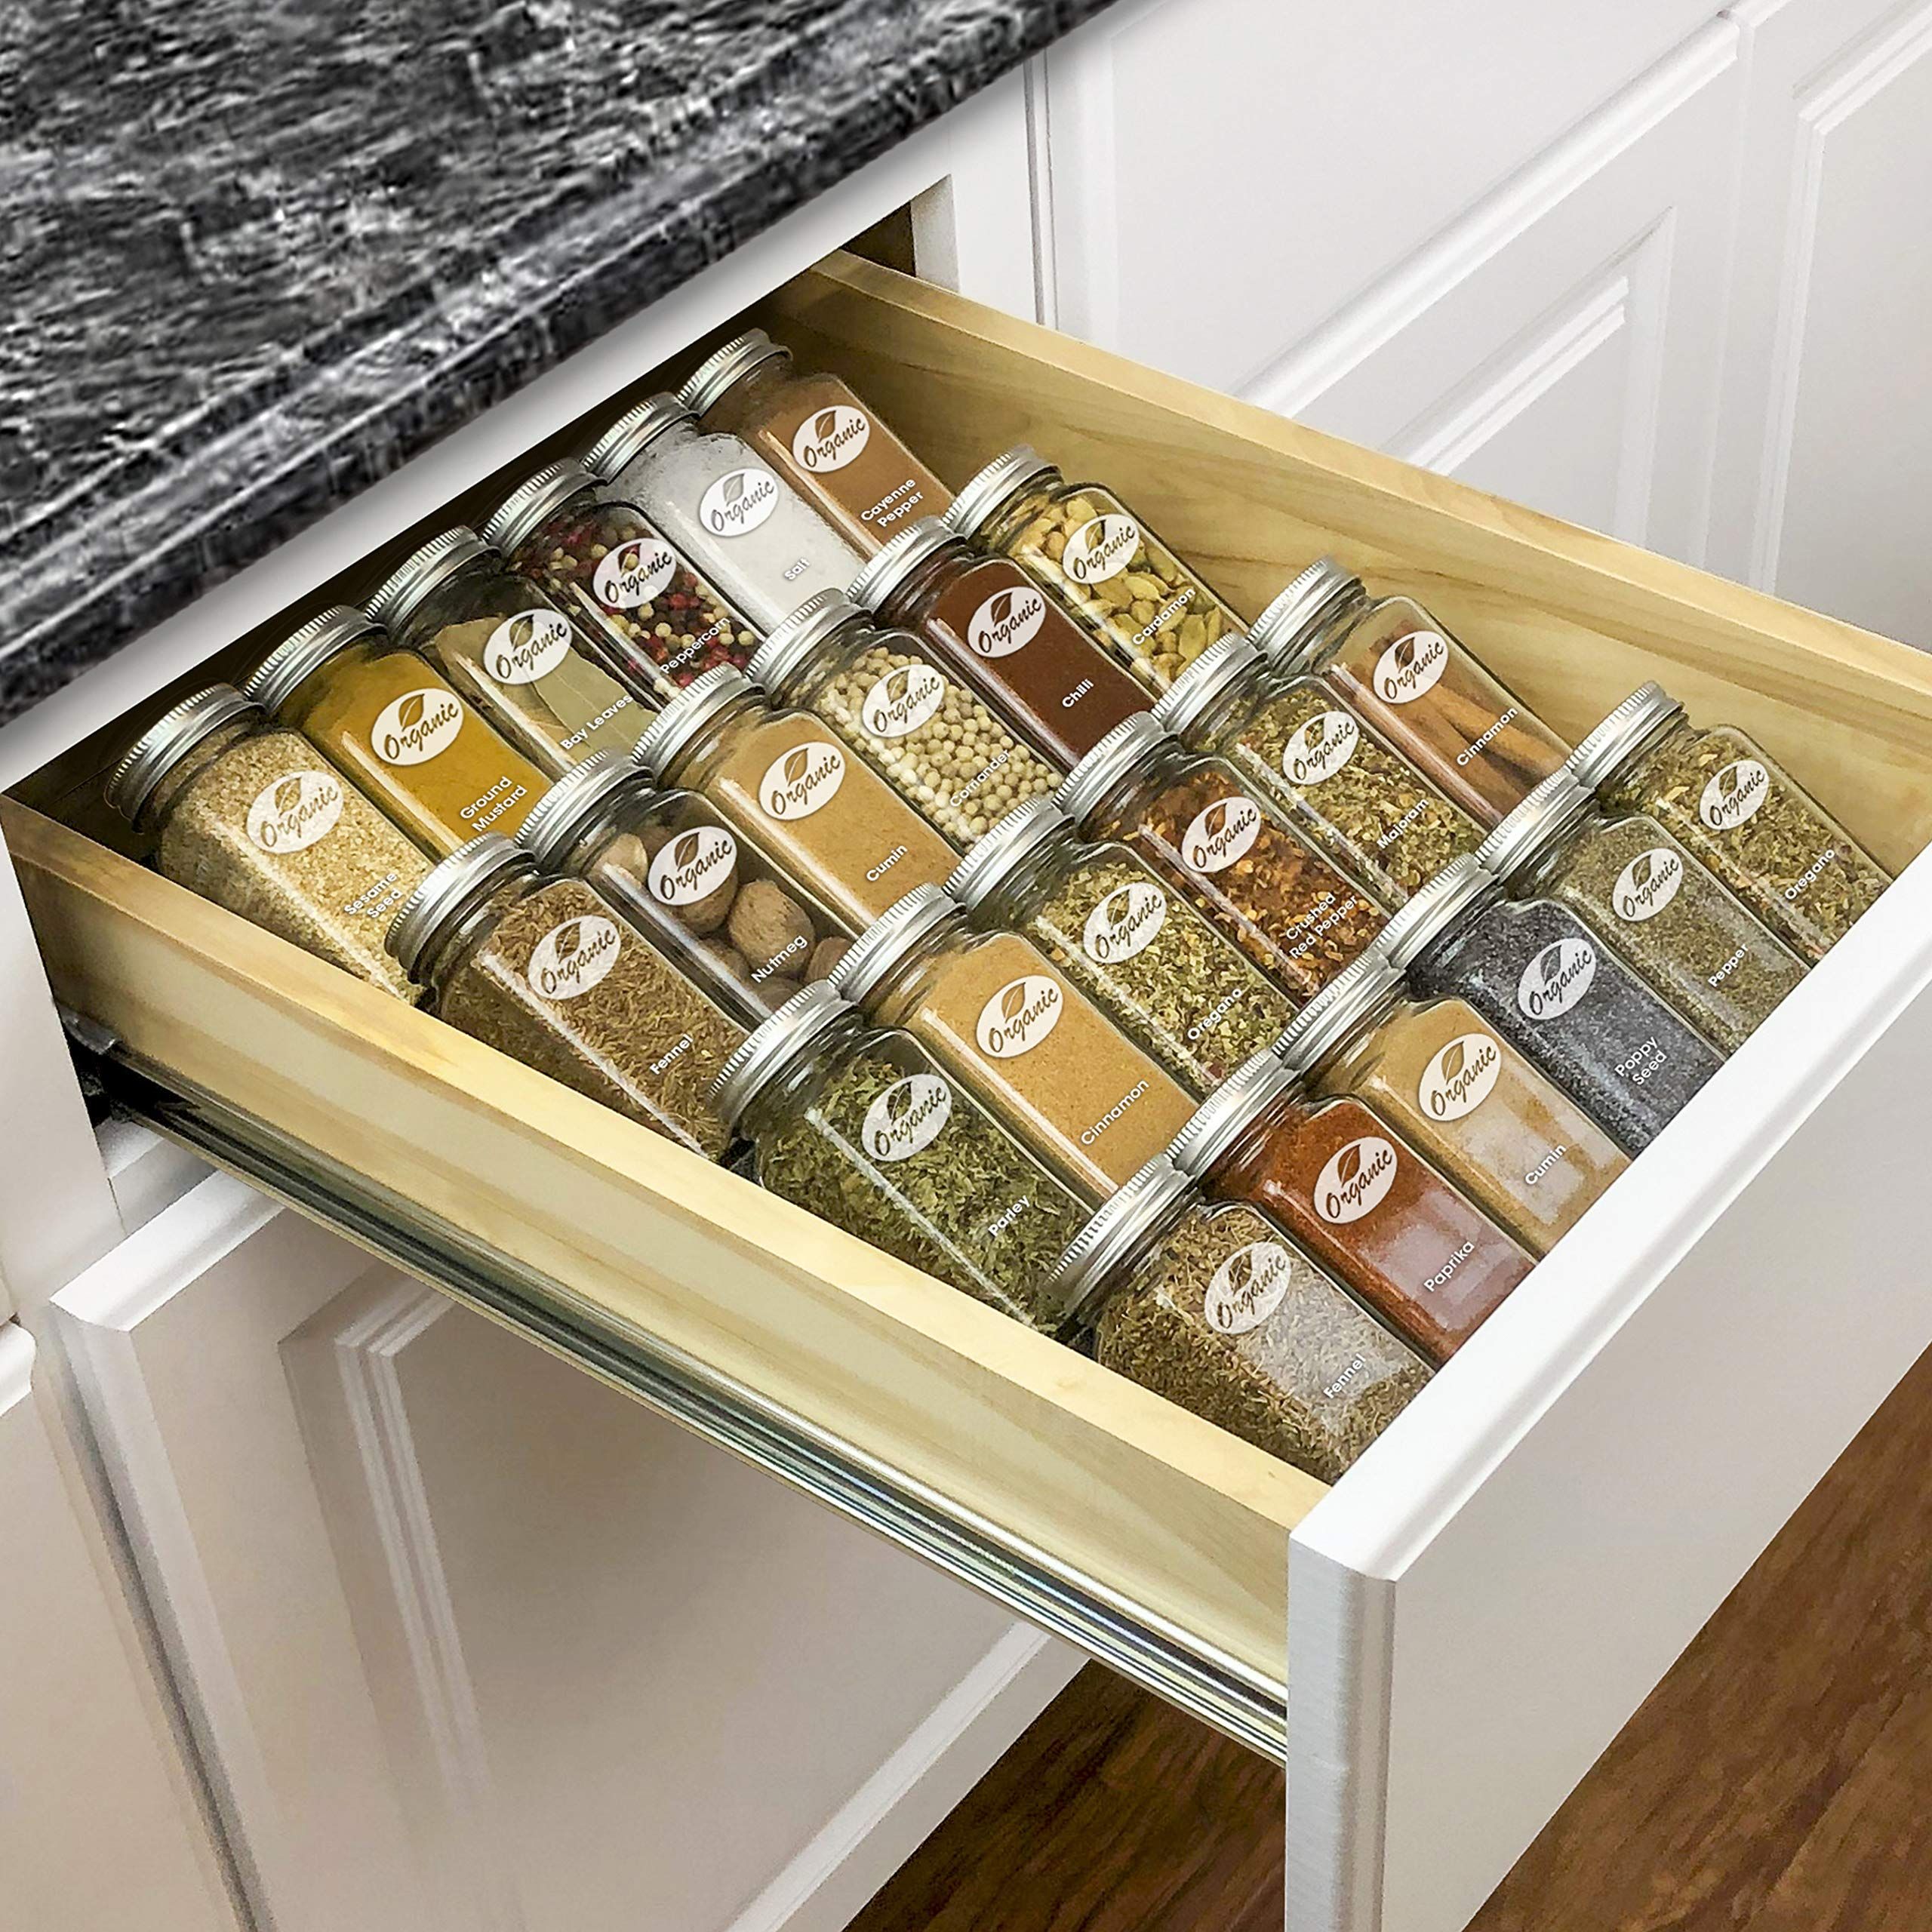 Lynk Professional® Spice Rack Tray - Heavy Gauge Steel 4 Tier Drawer Organizer for Kitchen Cabinets, | Amazon (US)